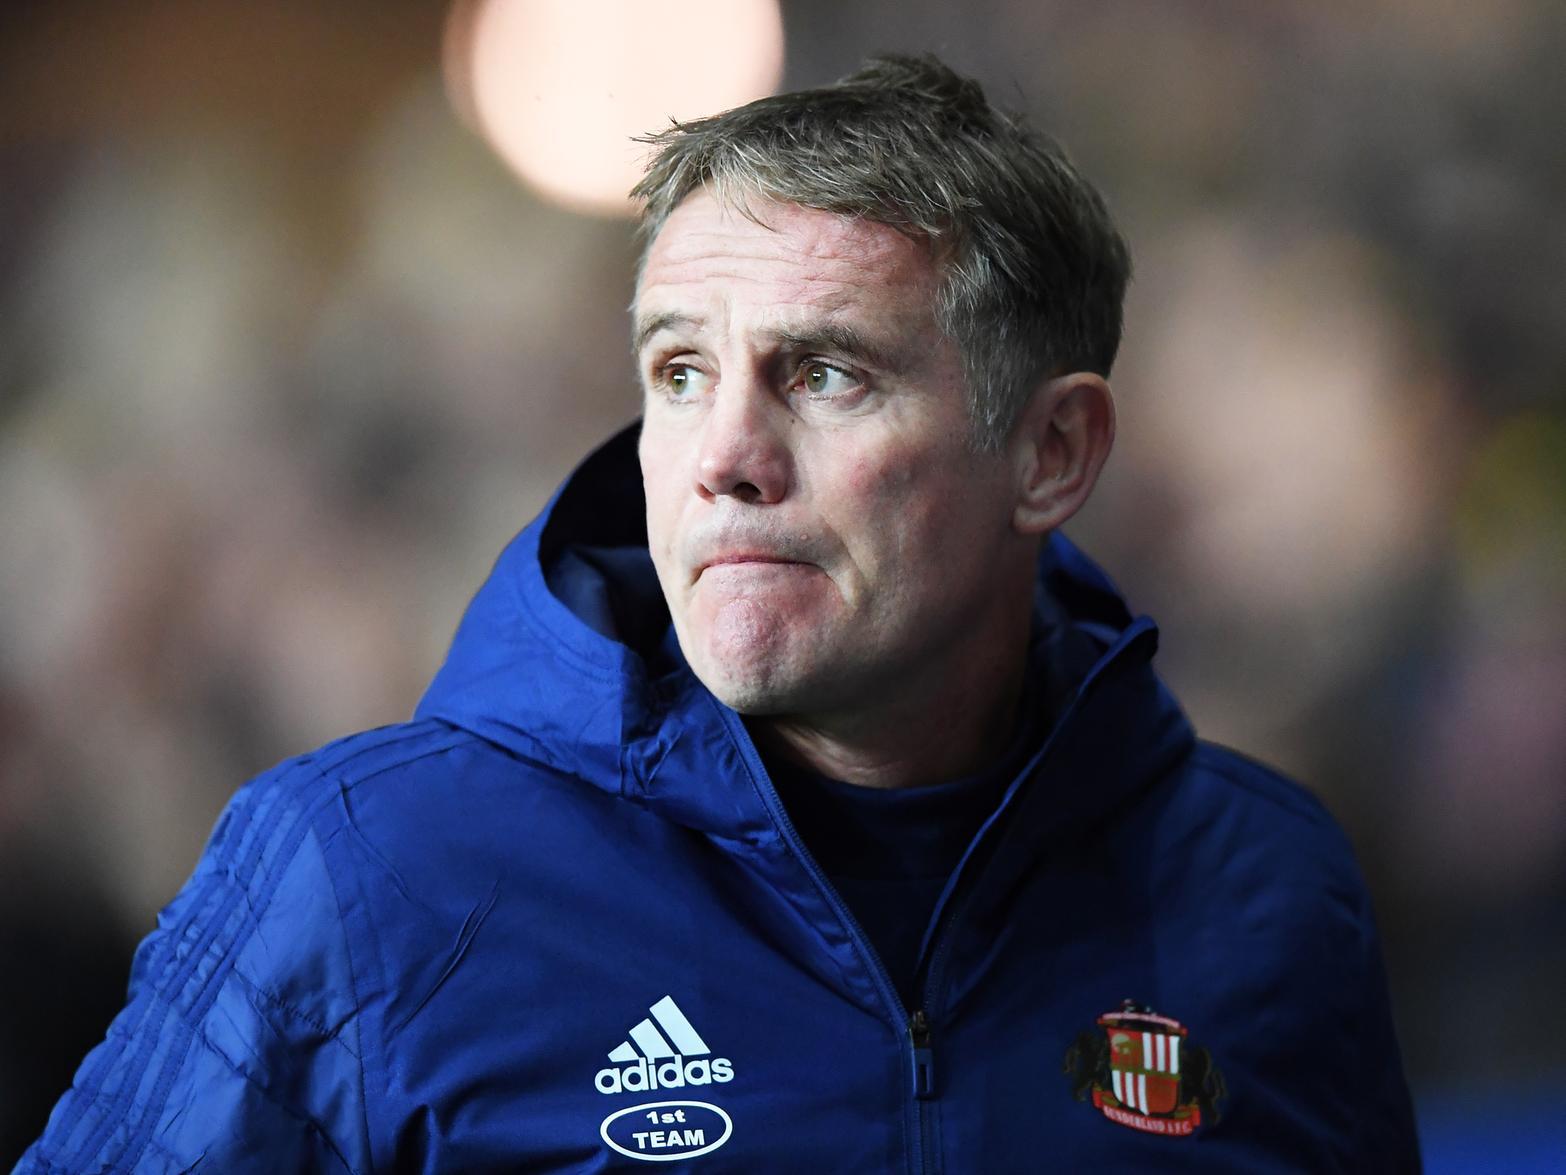 Strikers Antione Semenyo and Zach Clough and Gary Madine have also been linked with a Sunderland switch. Although Phil Parkinson has reportedly cooled his interest in the latter. (Various)